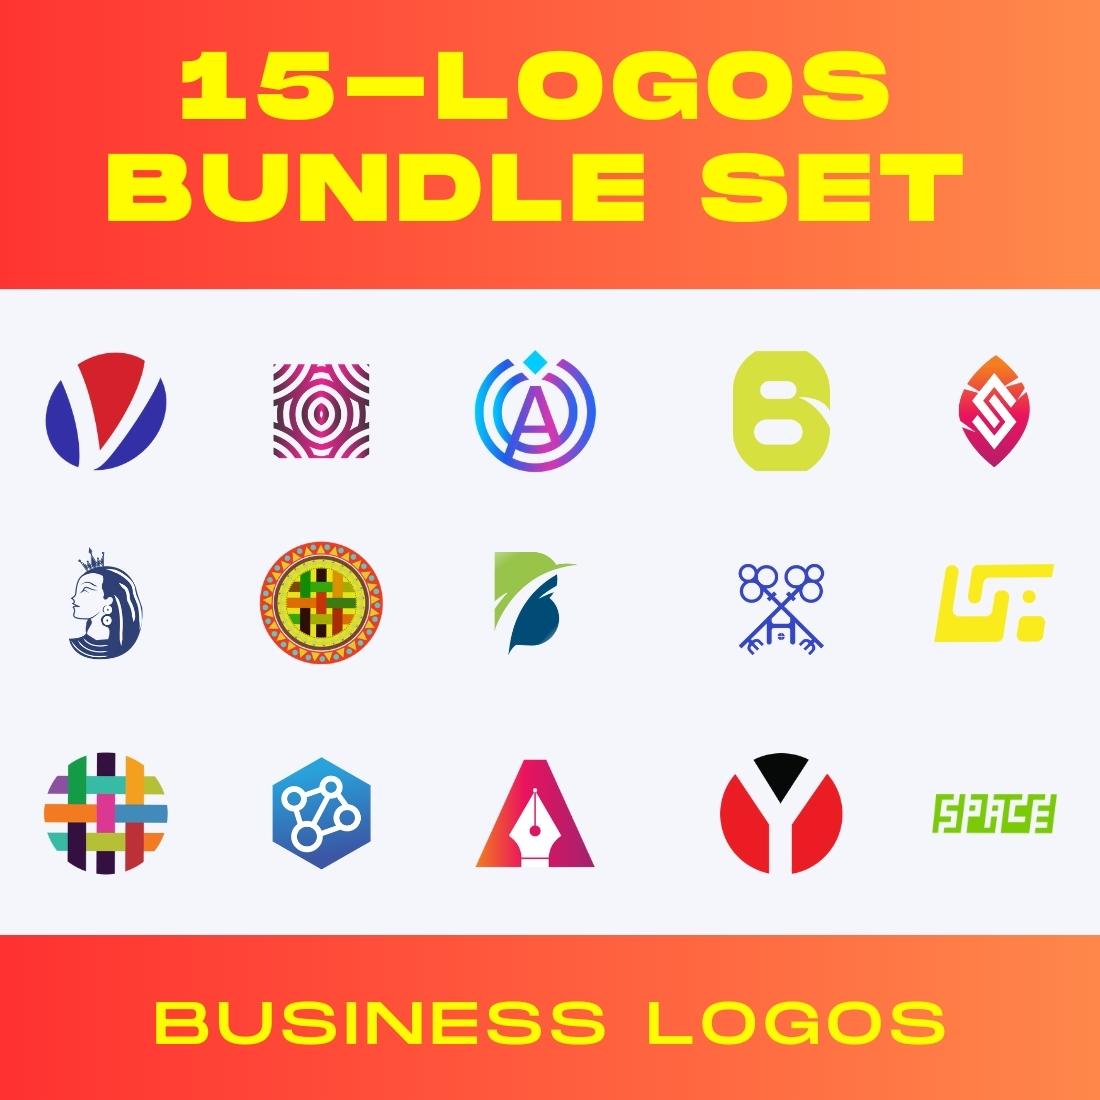 Business logos (15-Logos) bundle pack -Only $35 preview image.